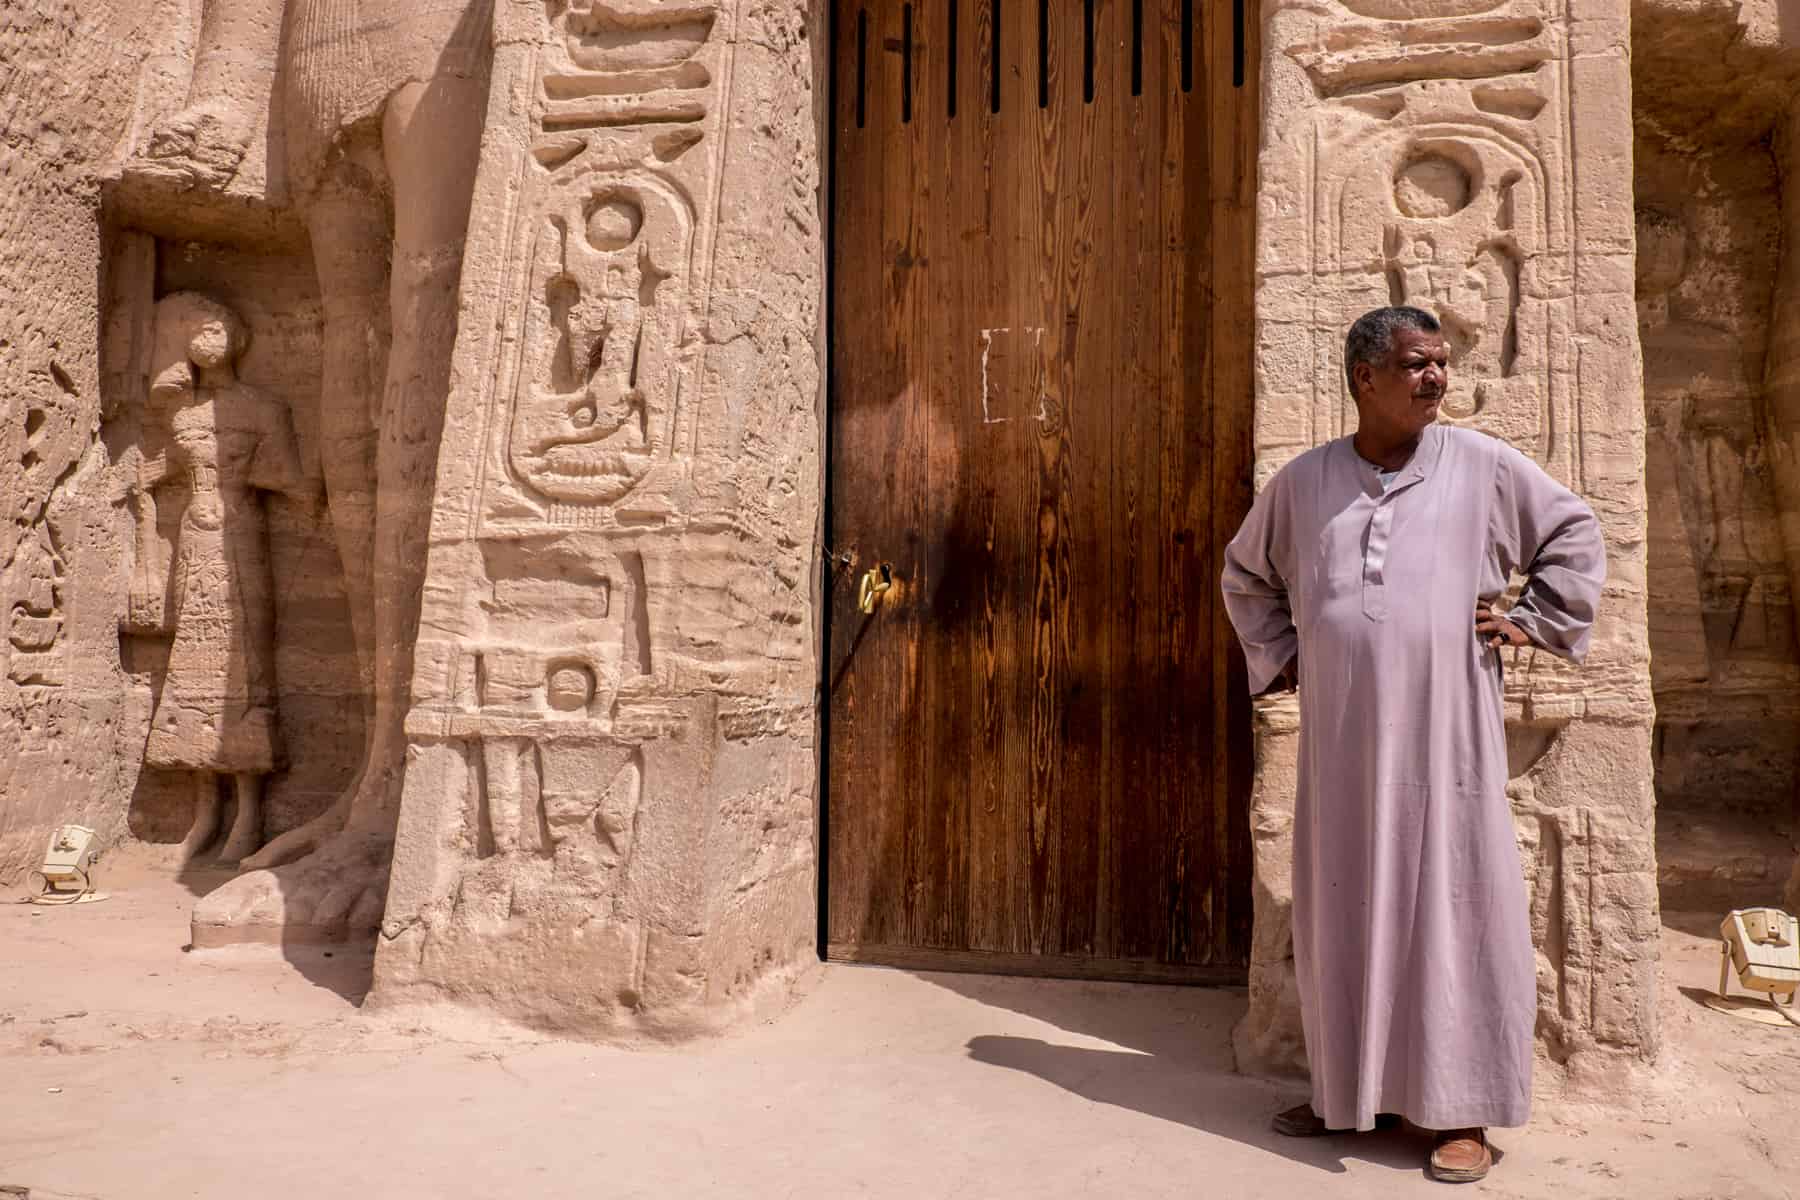 An Egyptian man wearing a long tunic guards a wooden entrance door to the rock carved Abu Simbel temple near Aswan, Egypt